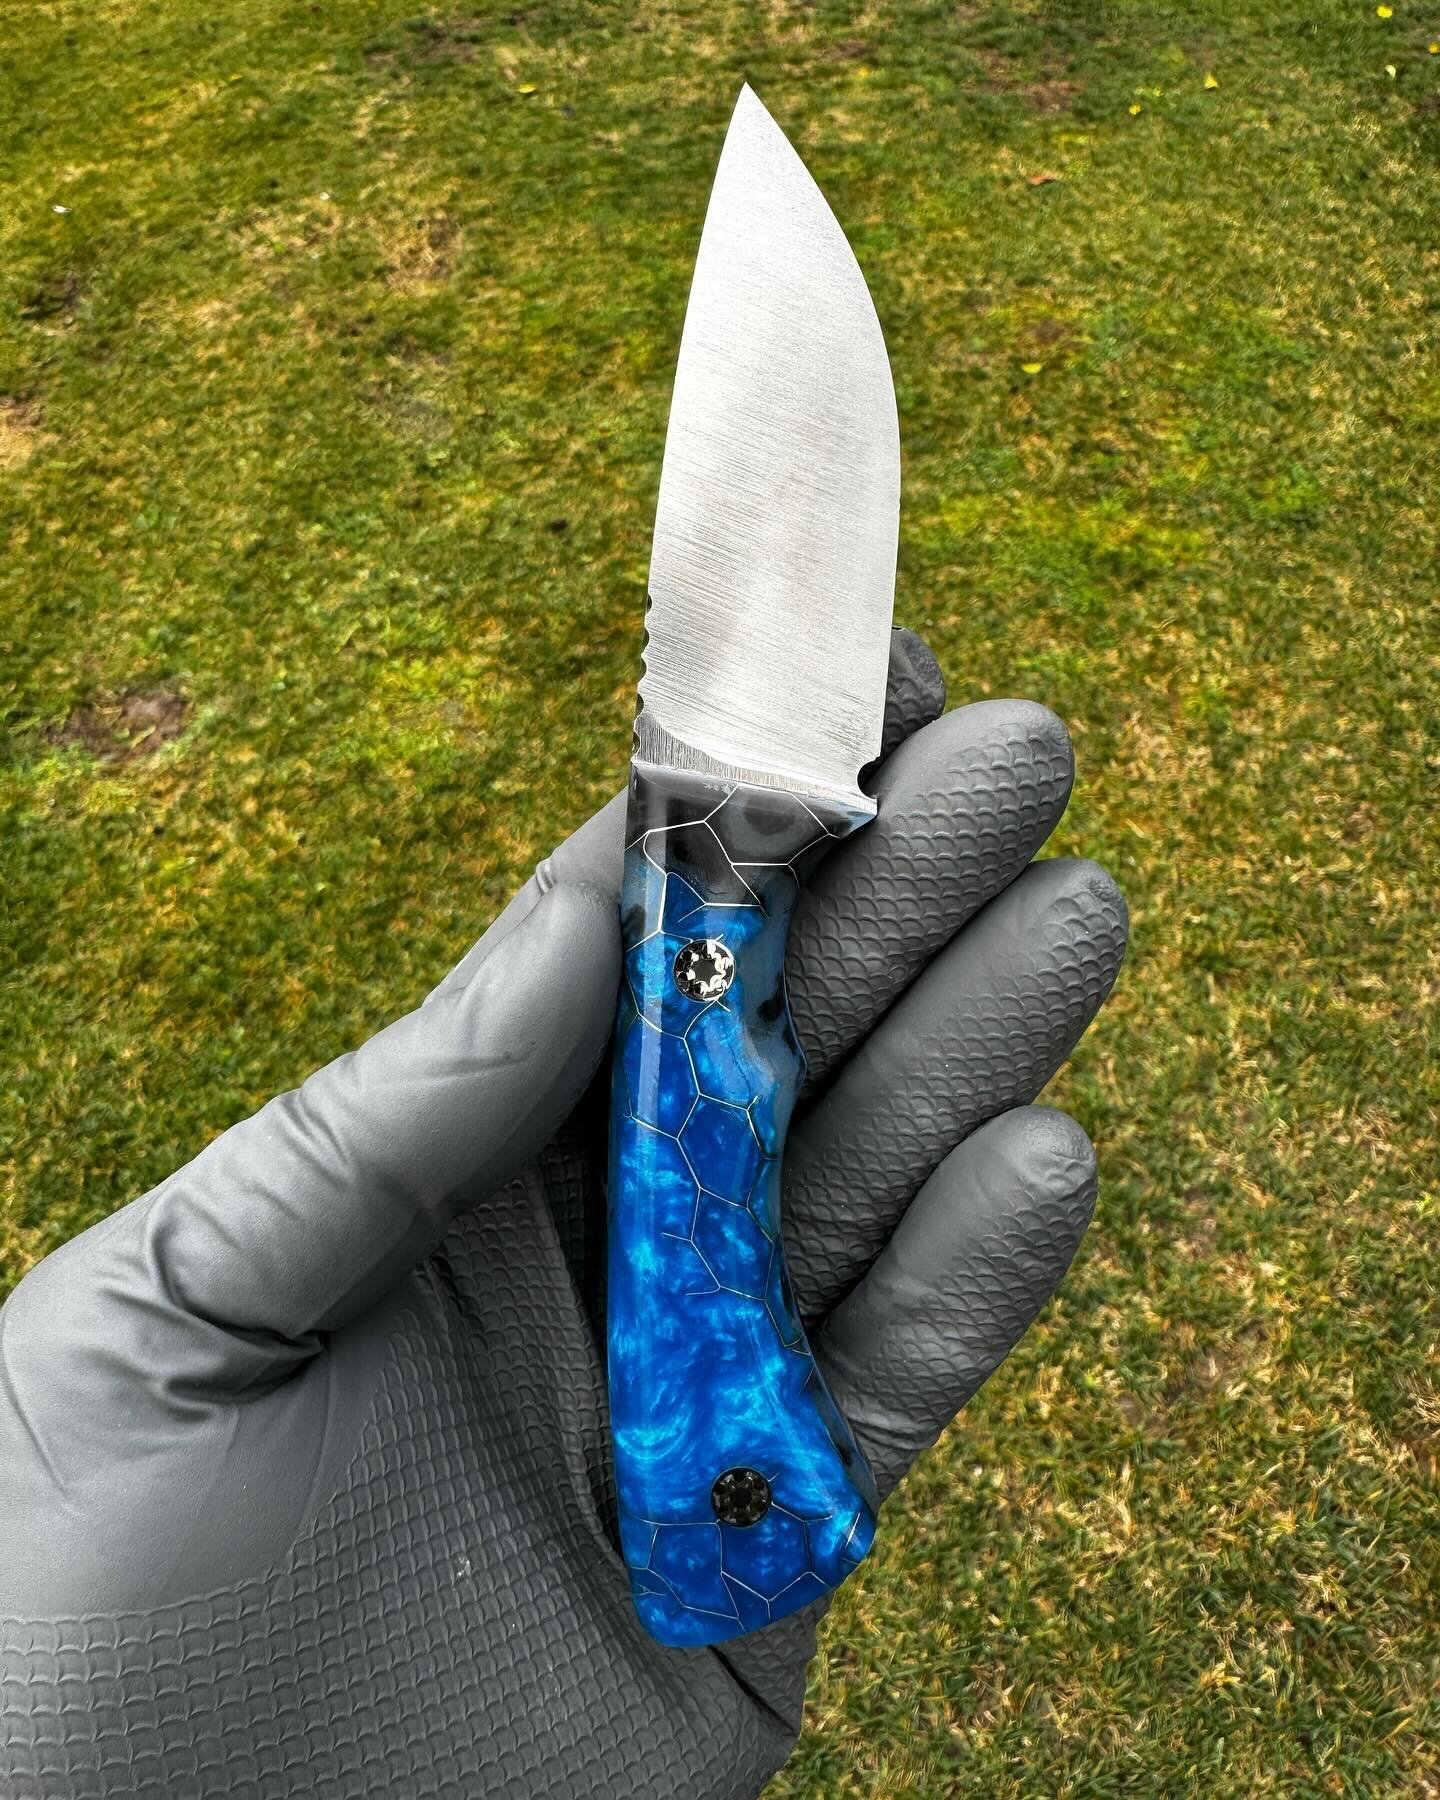 Brother in Blue black glow resin! Love how this turned out.

Blade - MagnaCut
Handle - Blue Black Glow Resin from @voodoo_resins w/ mosaic pins
*Taken*

#handmade #knife #knives #blade #blades #sinanblades #sinan #steel #damascus #damasteel #fixedbla